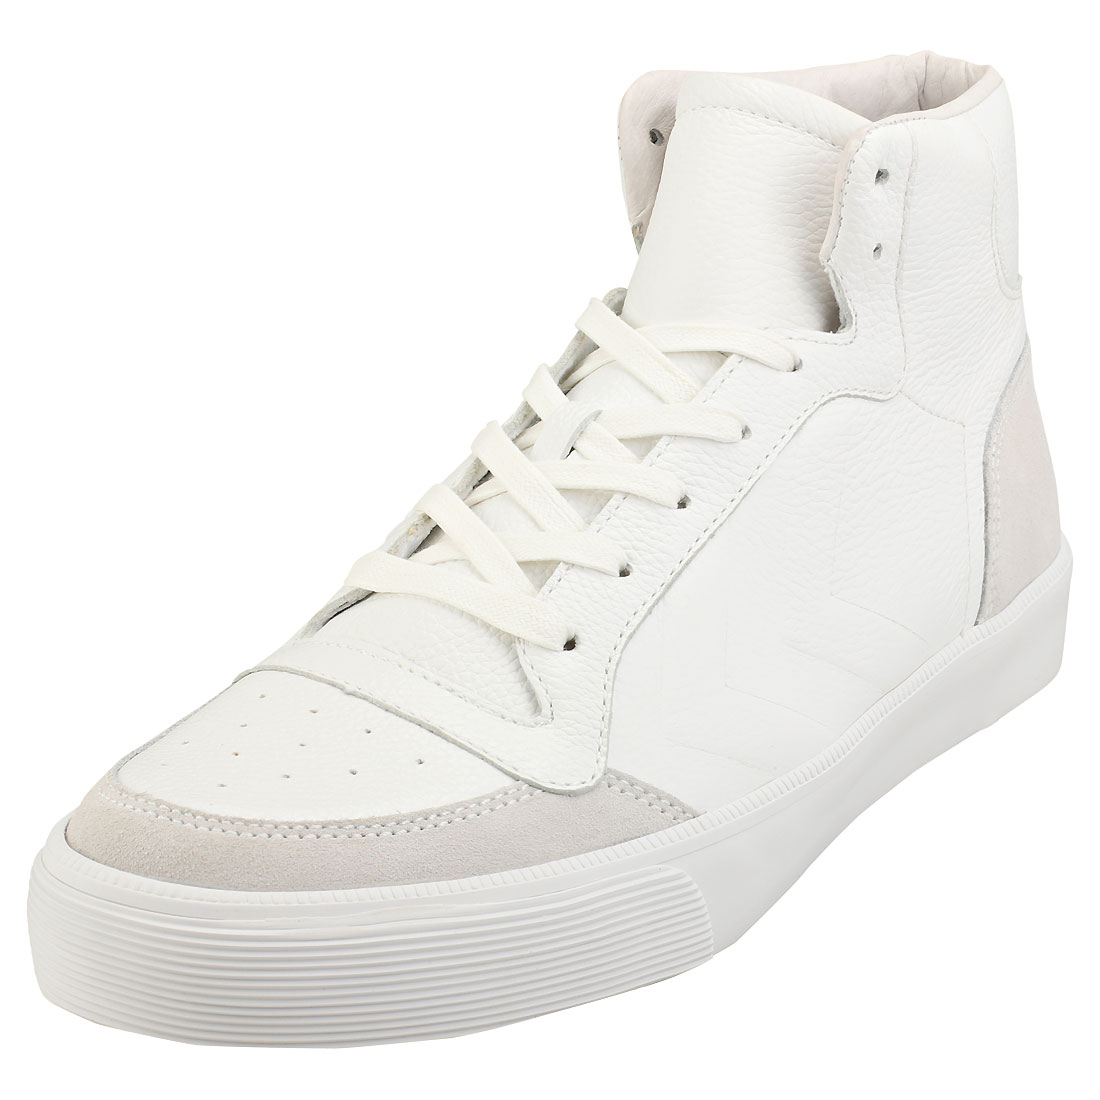 hummel Stadil Rmx High Sneaker Mens White Leather & Suede Casual ...